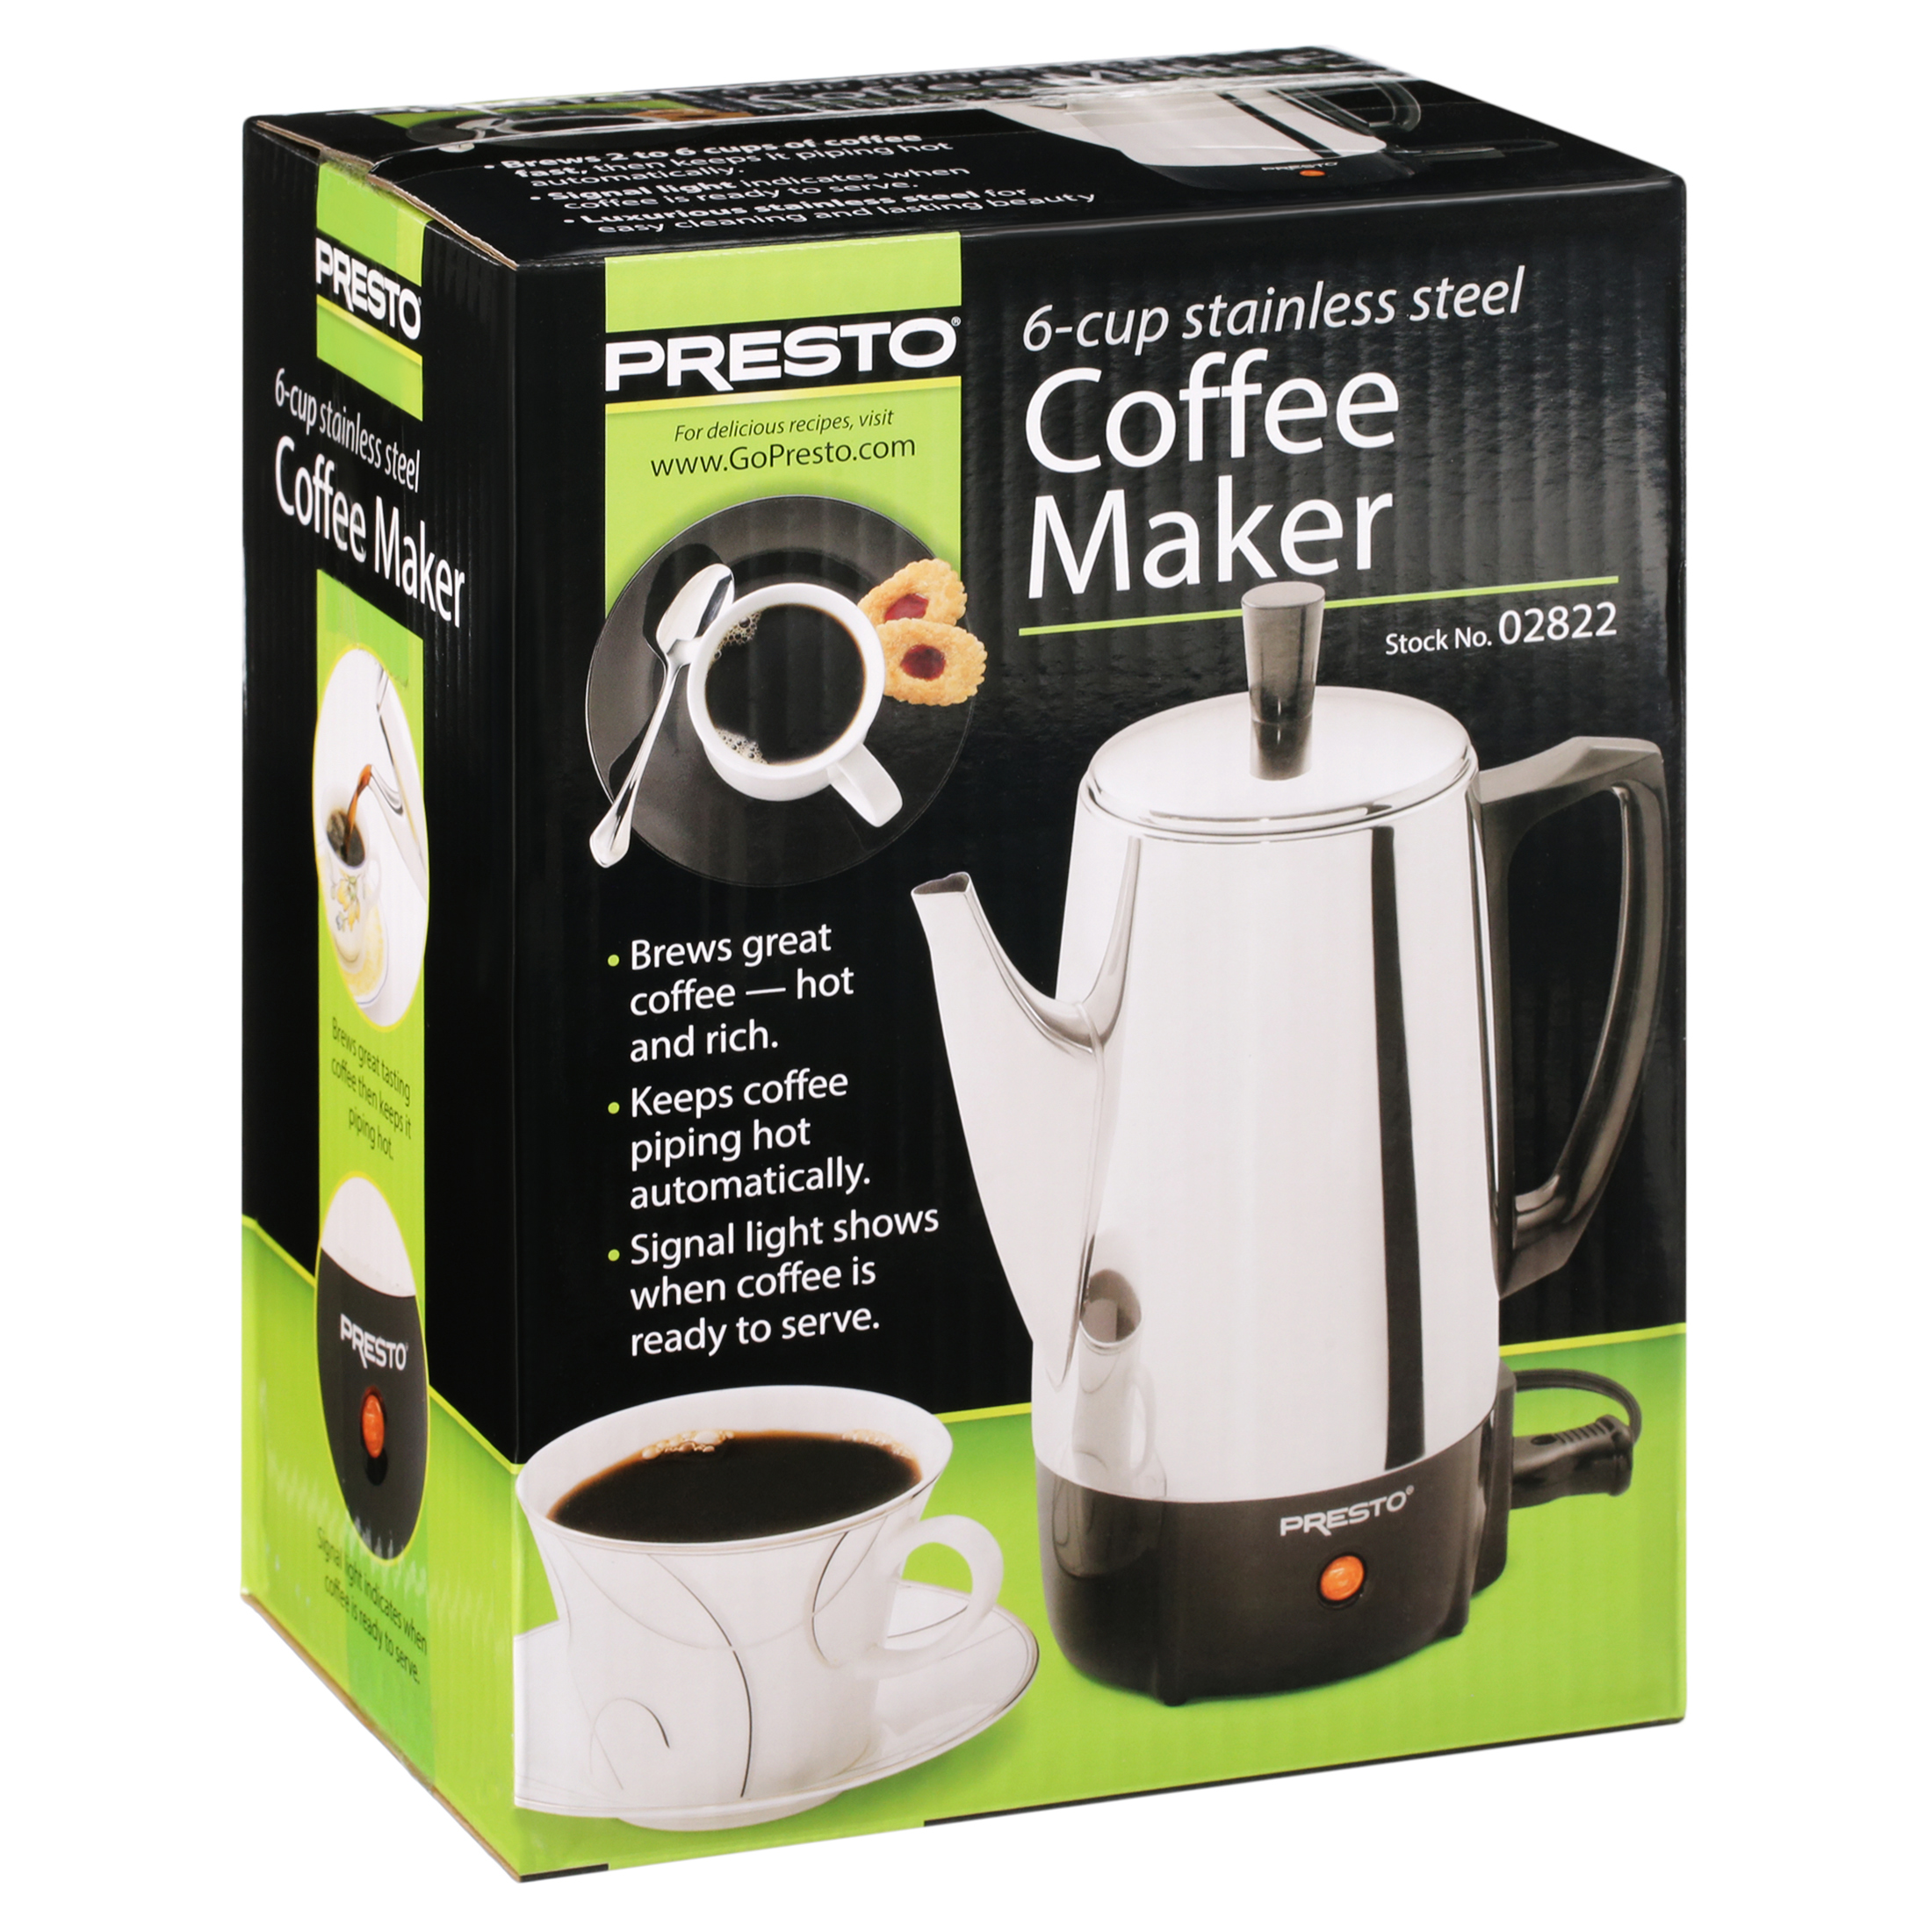 Presto® 6-Cup Capacity Stainless Steel Coffee Maker 02822 - image 8 of 10